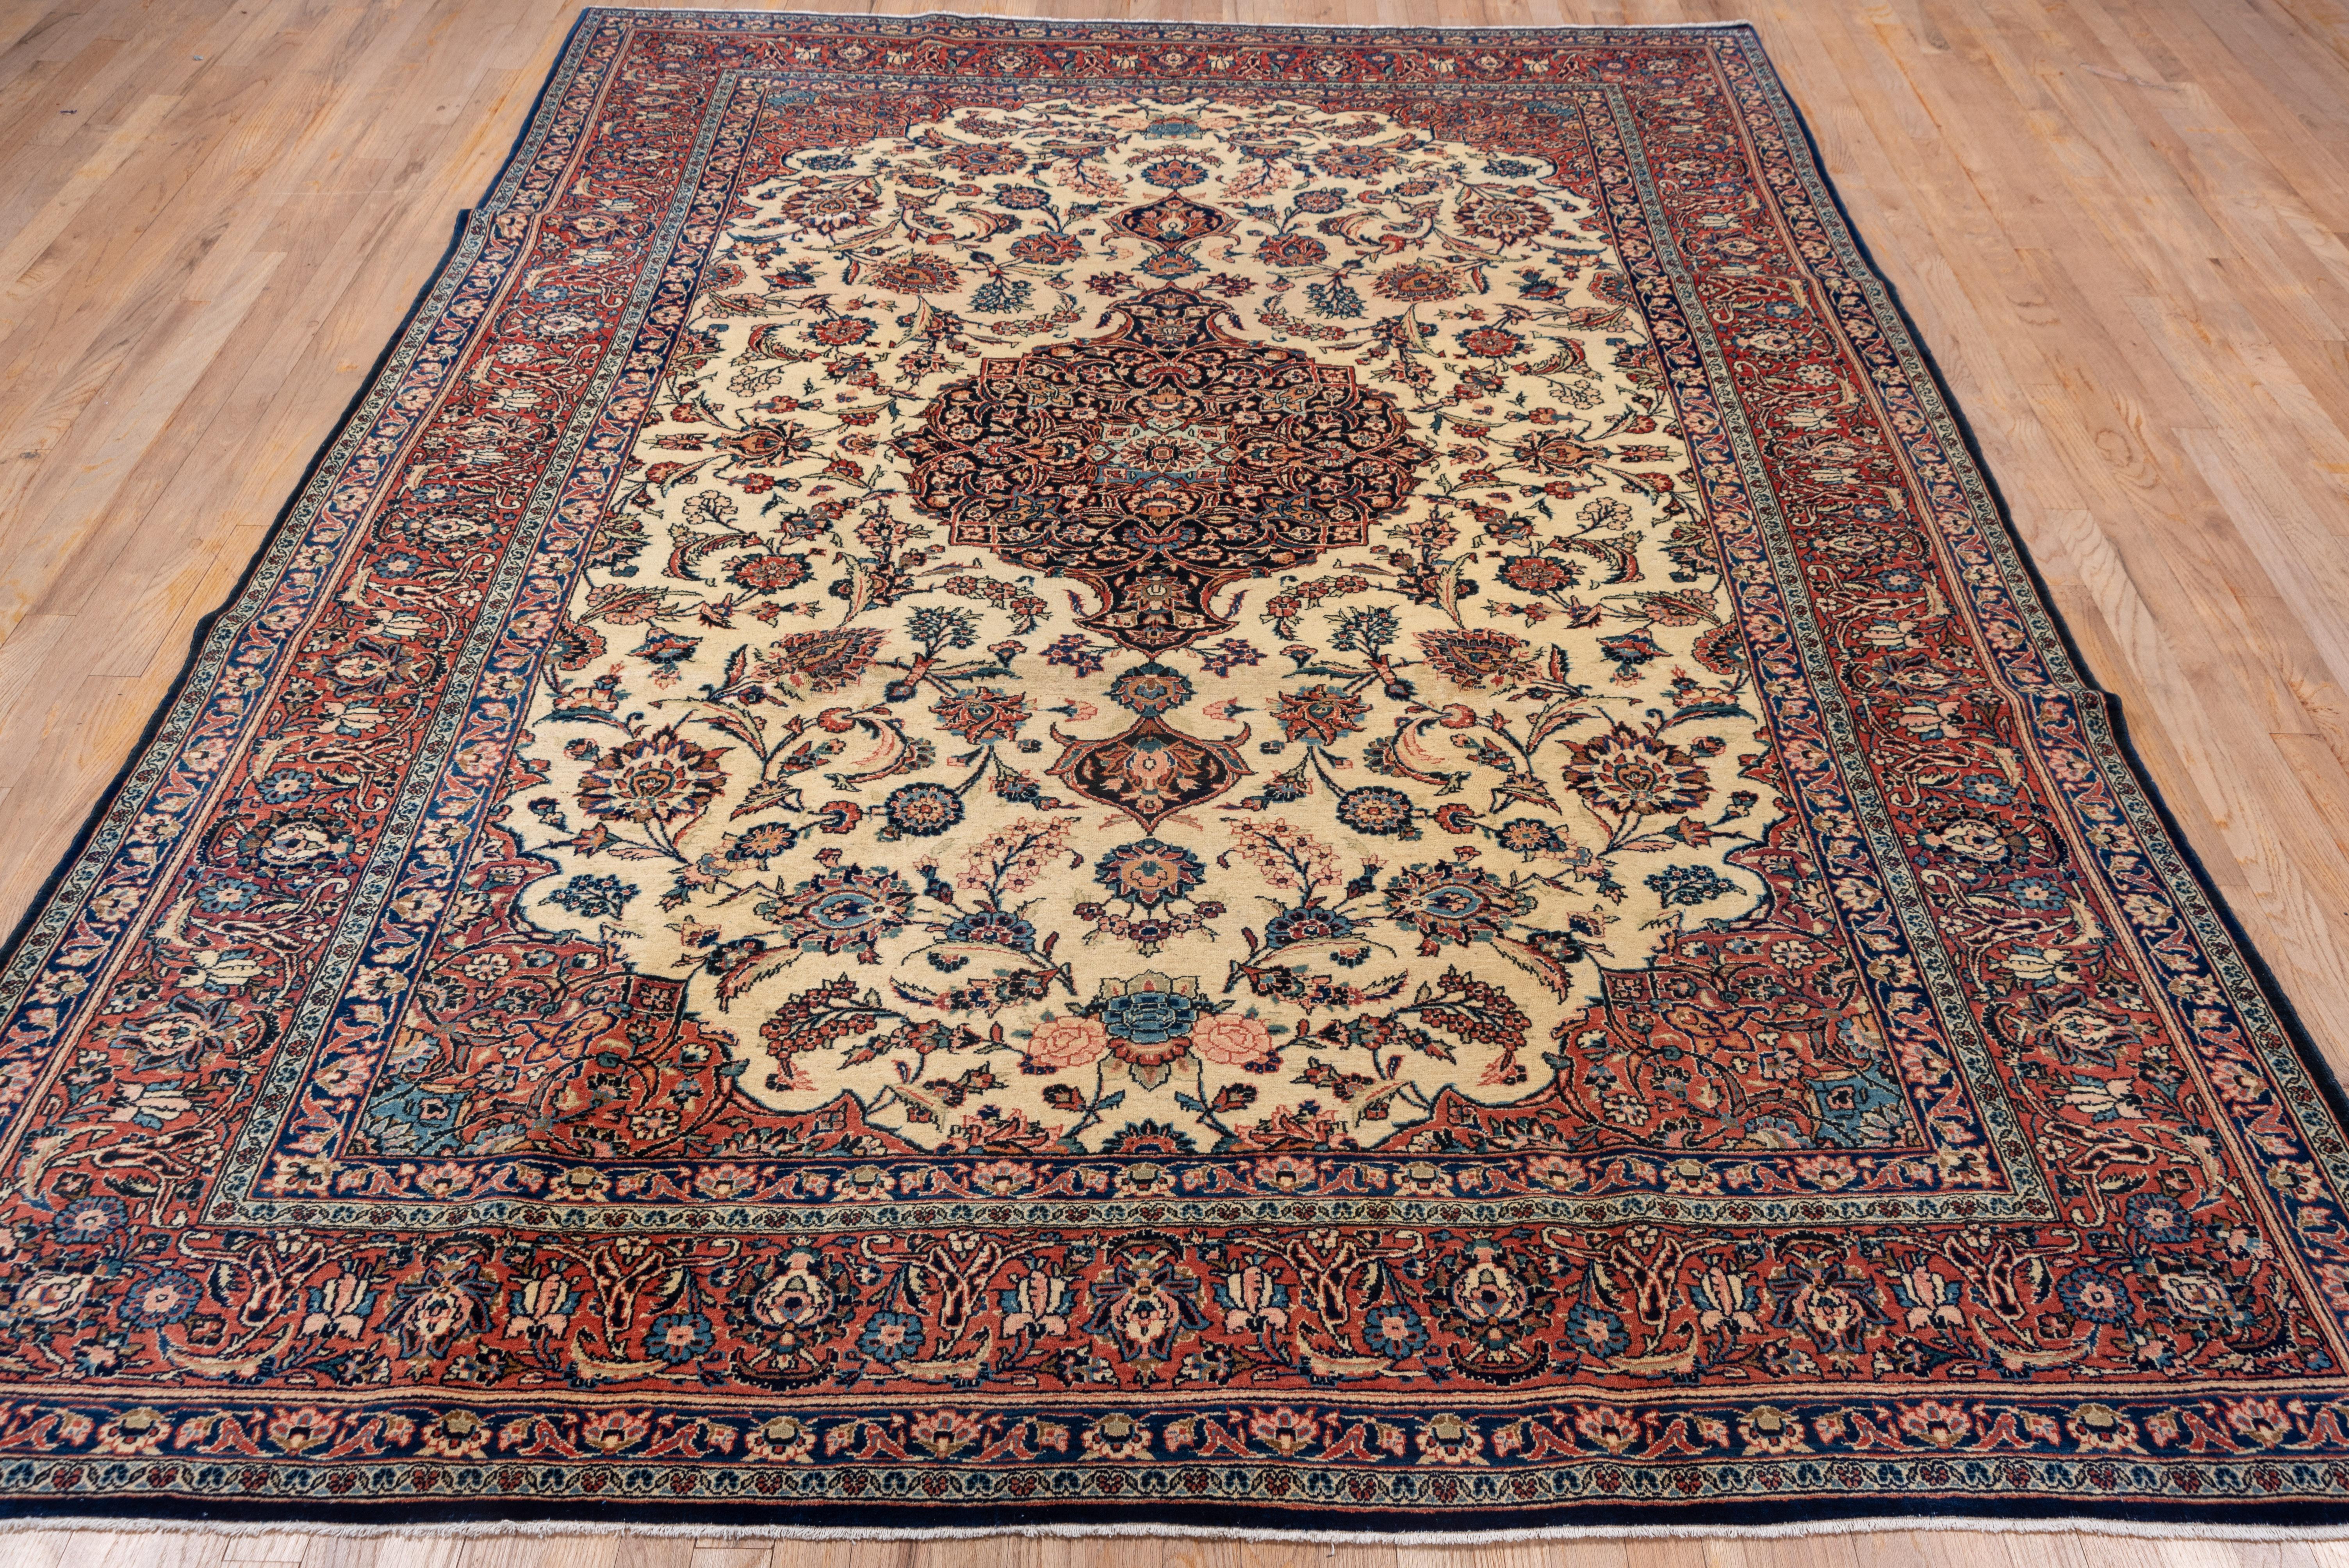 Classic Antique Persian Kashan Rug, Floral Field with a Center Medallion In Good Condition For Sale In New York, NY